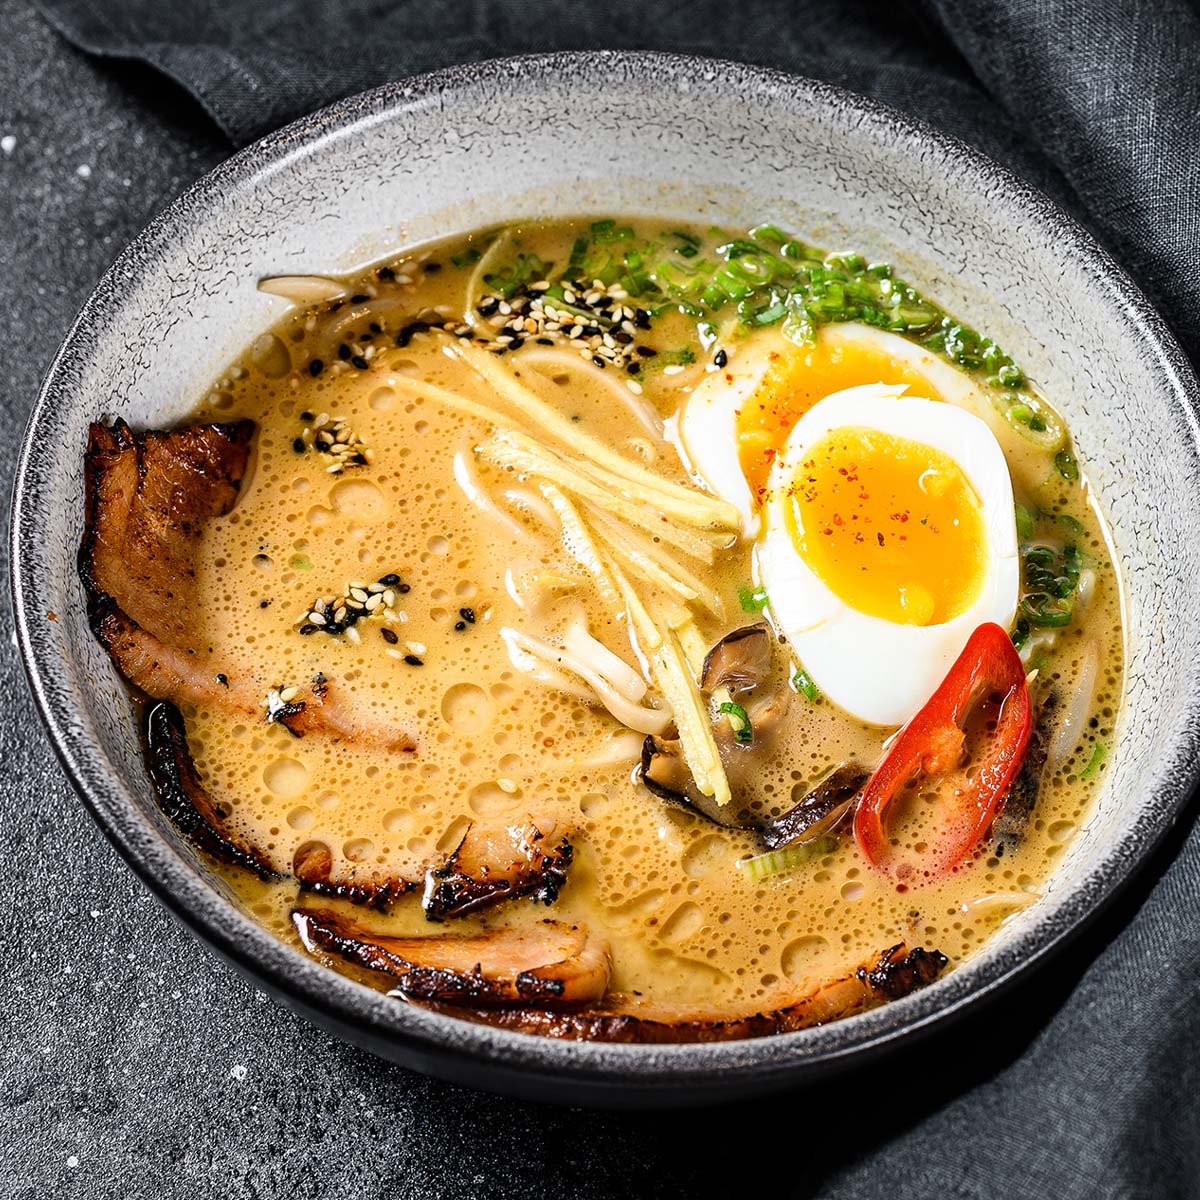 It's pretty easy to reheat ramen in one of two different ways, and you can even enhance the flavor by adding in some new goodies; why not?